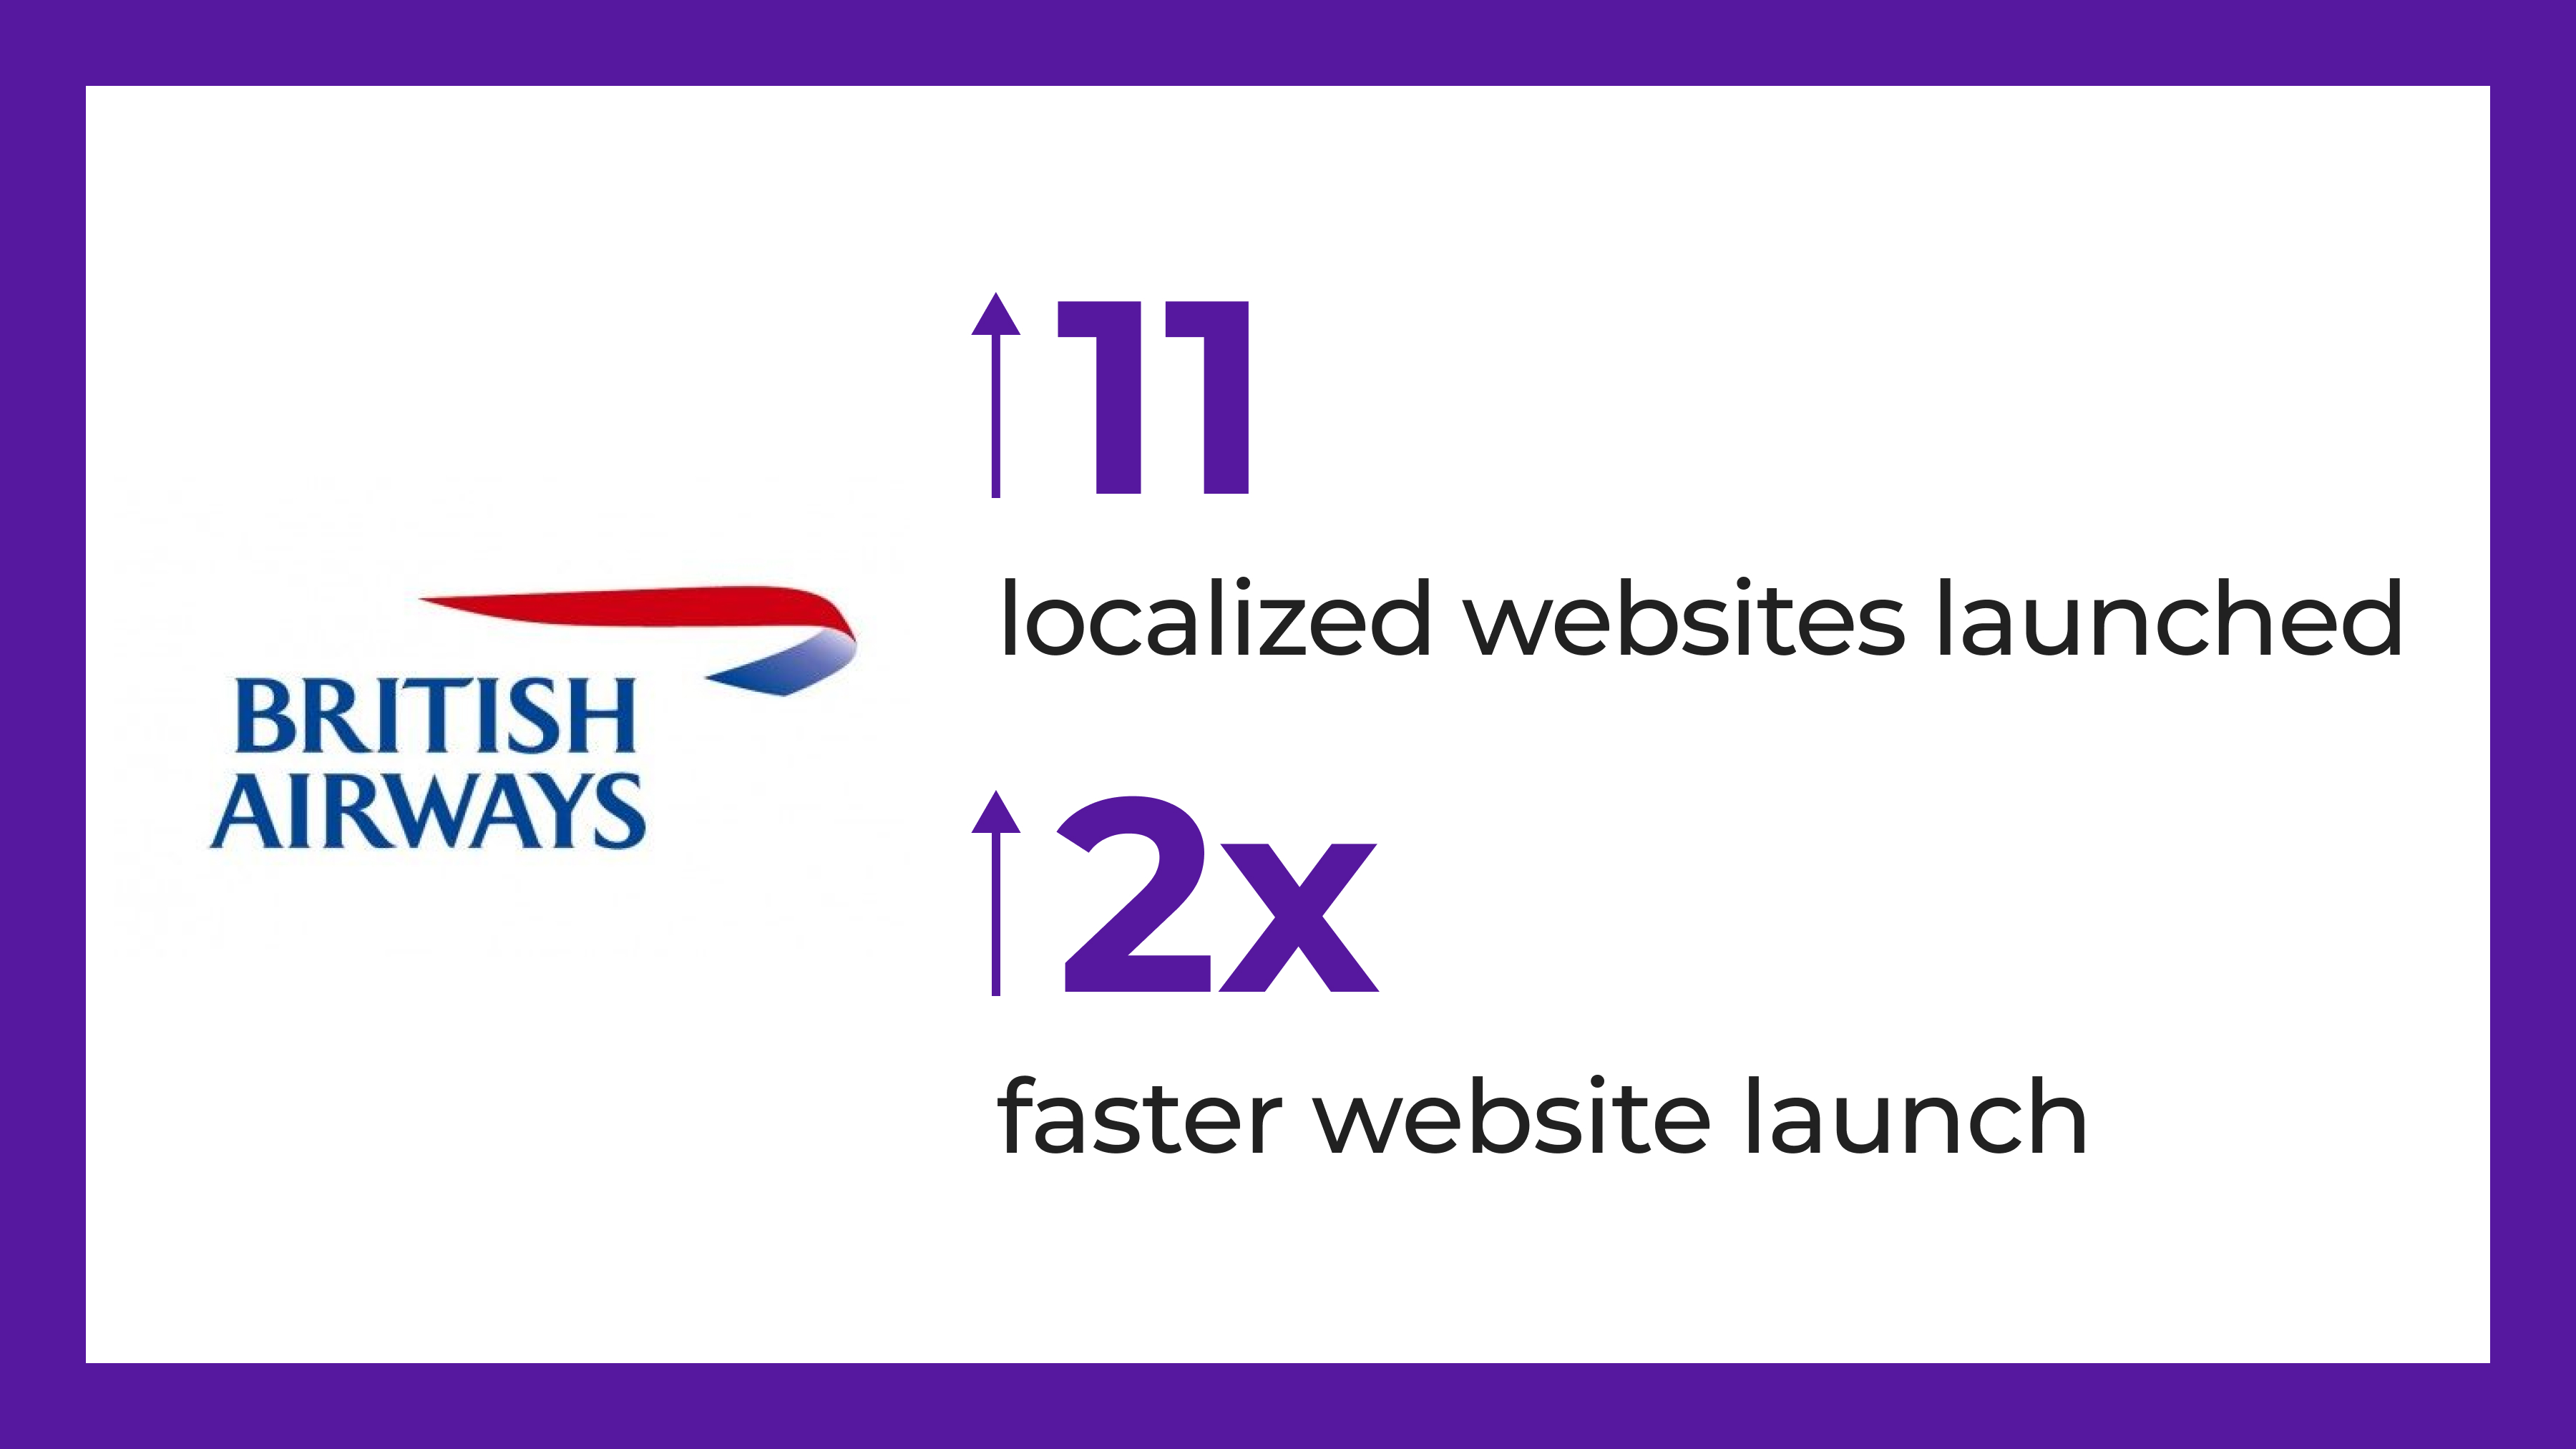 How British Airways launched 11 localized websites in half the time.